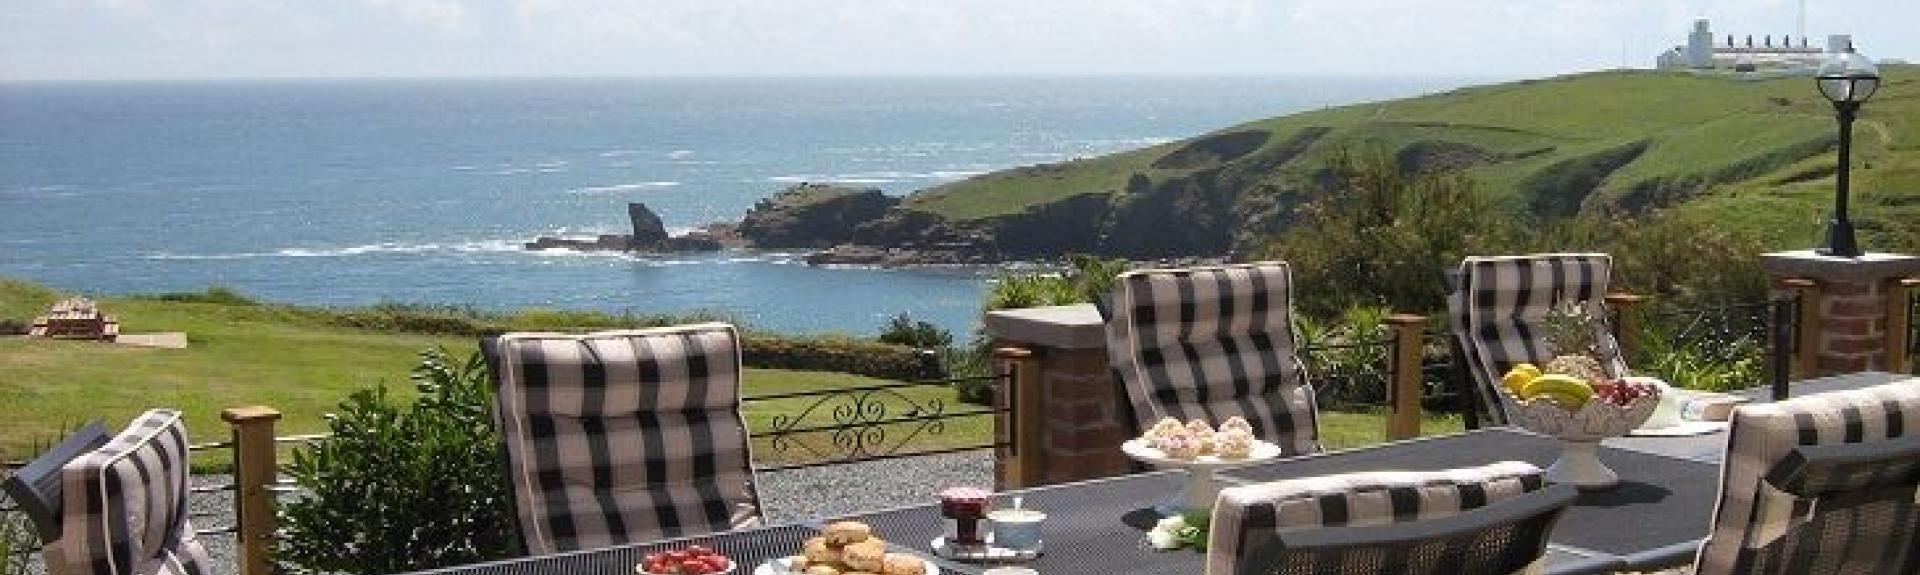 Chairs around an outdoor dining table offer beautiful sea views.